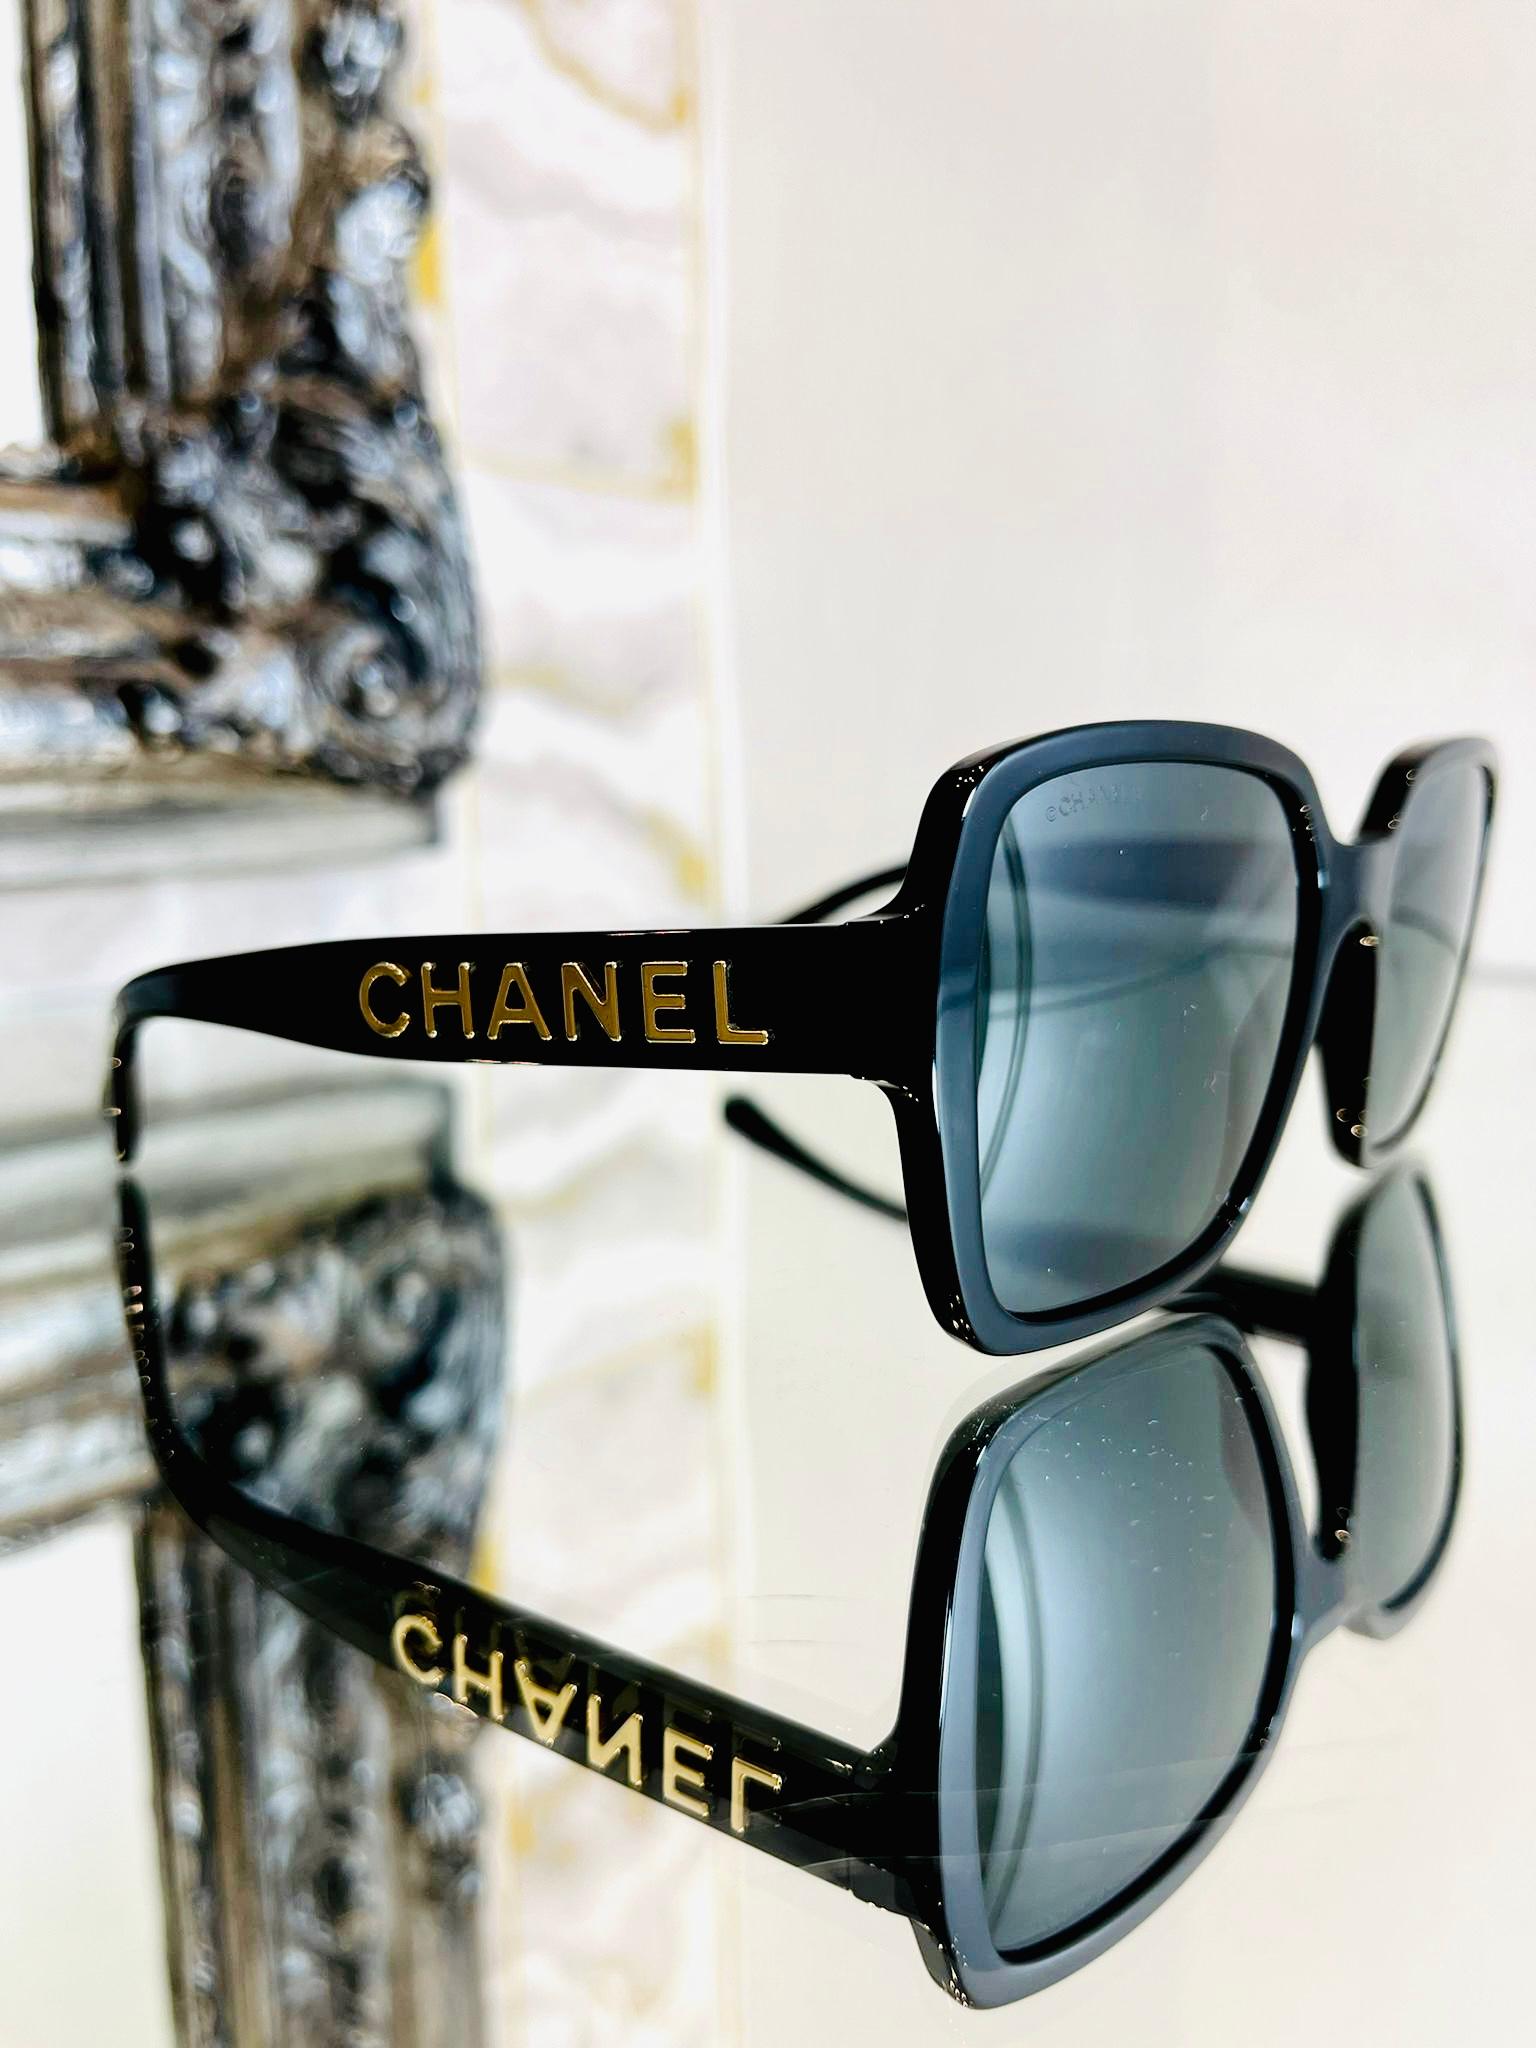 Chanel Logo 'CHANEL' Sunglasses   Black acetate frames with gold 'CHANEL' letter For Sale 4